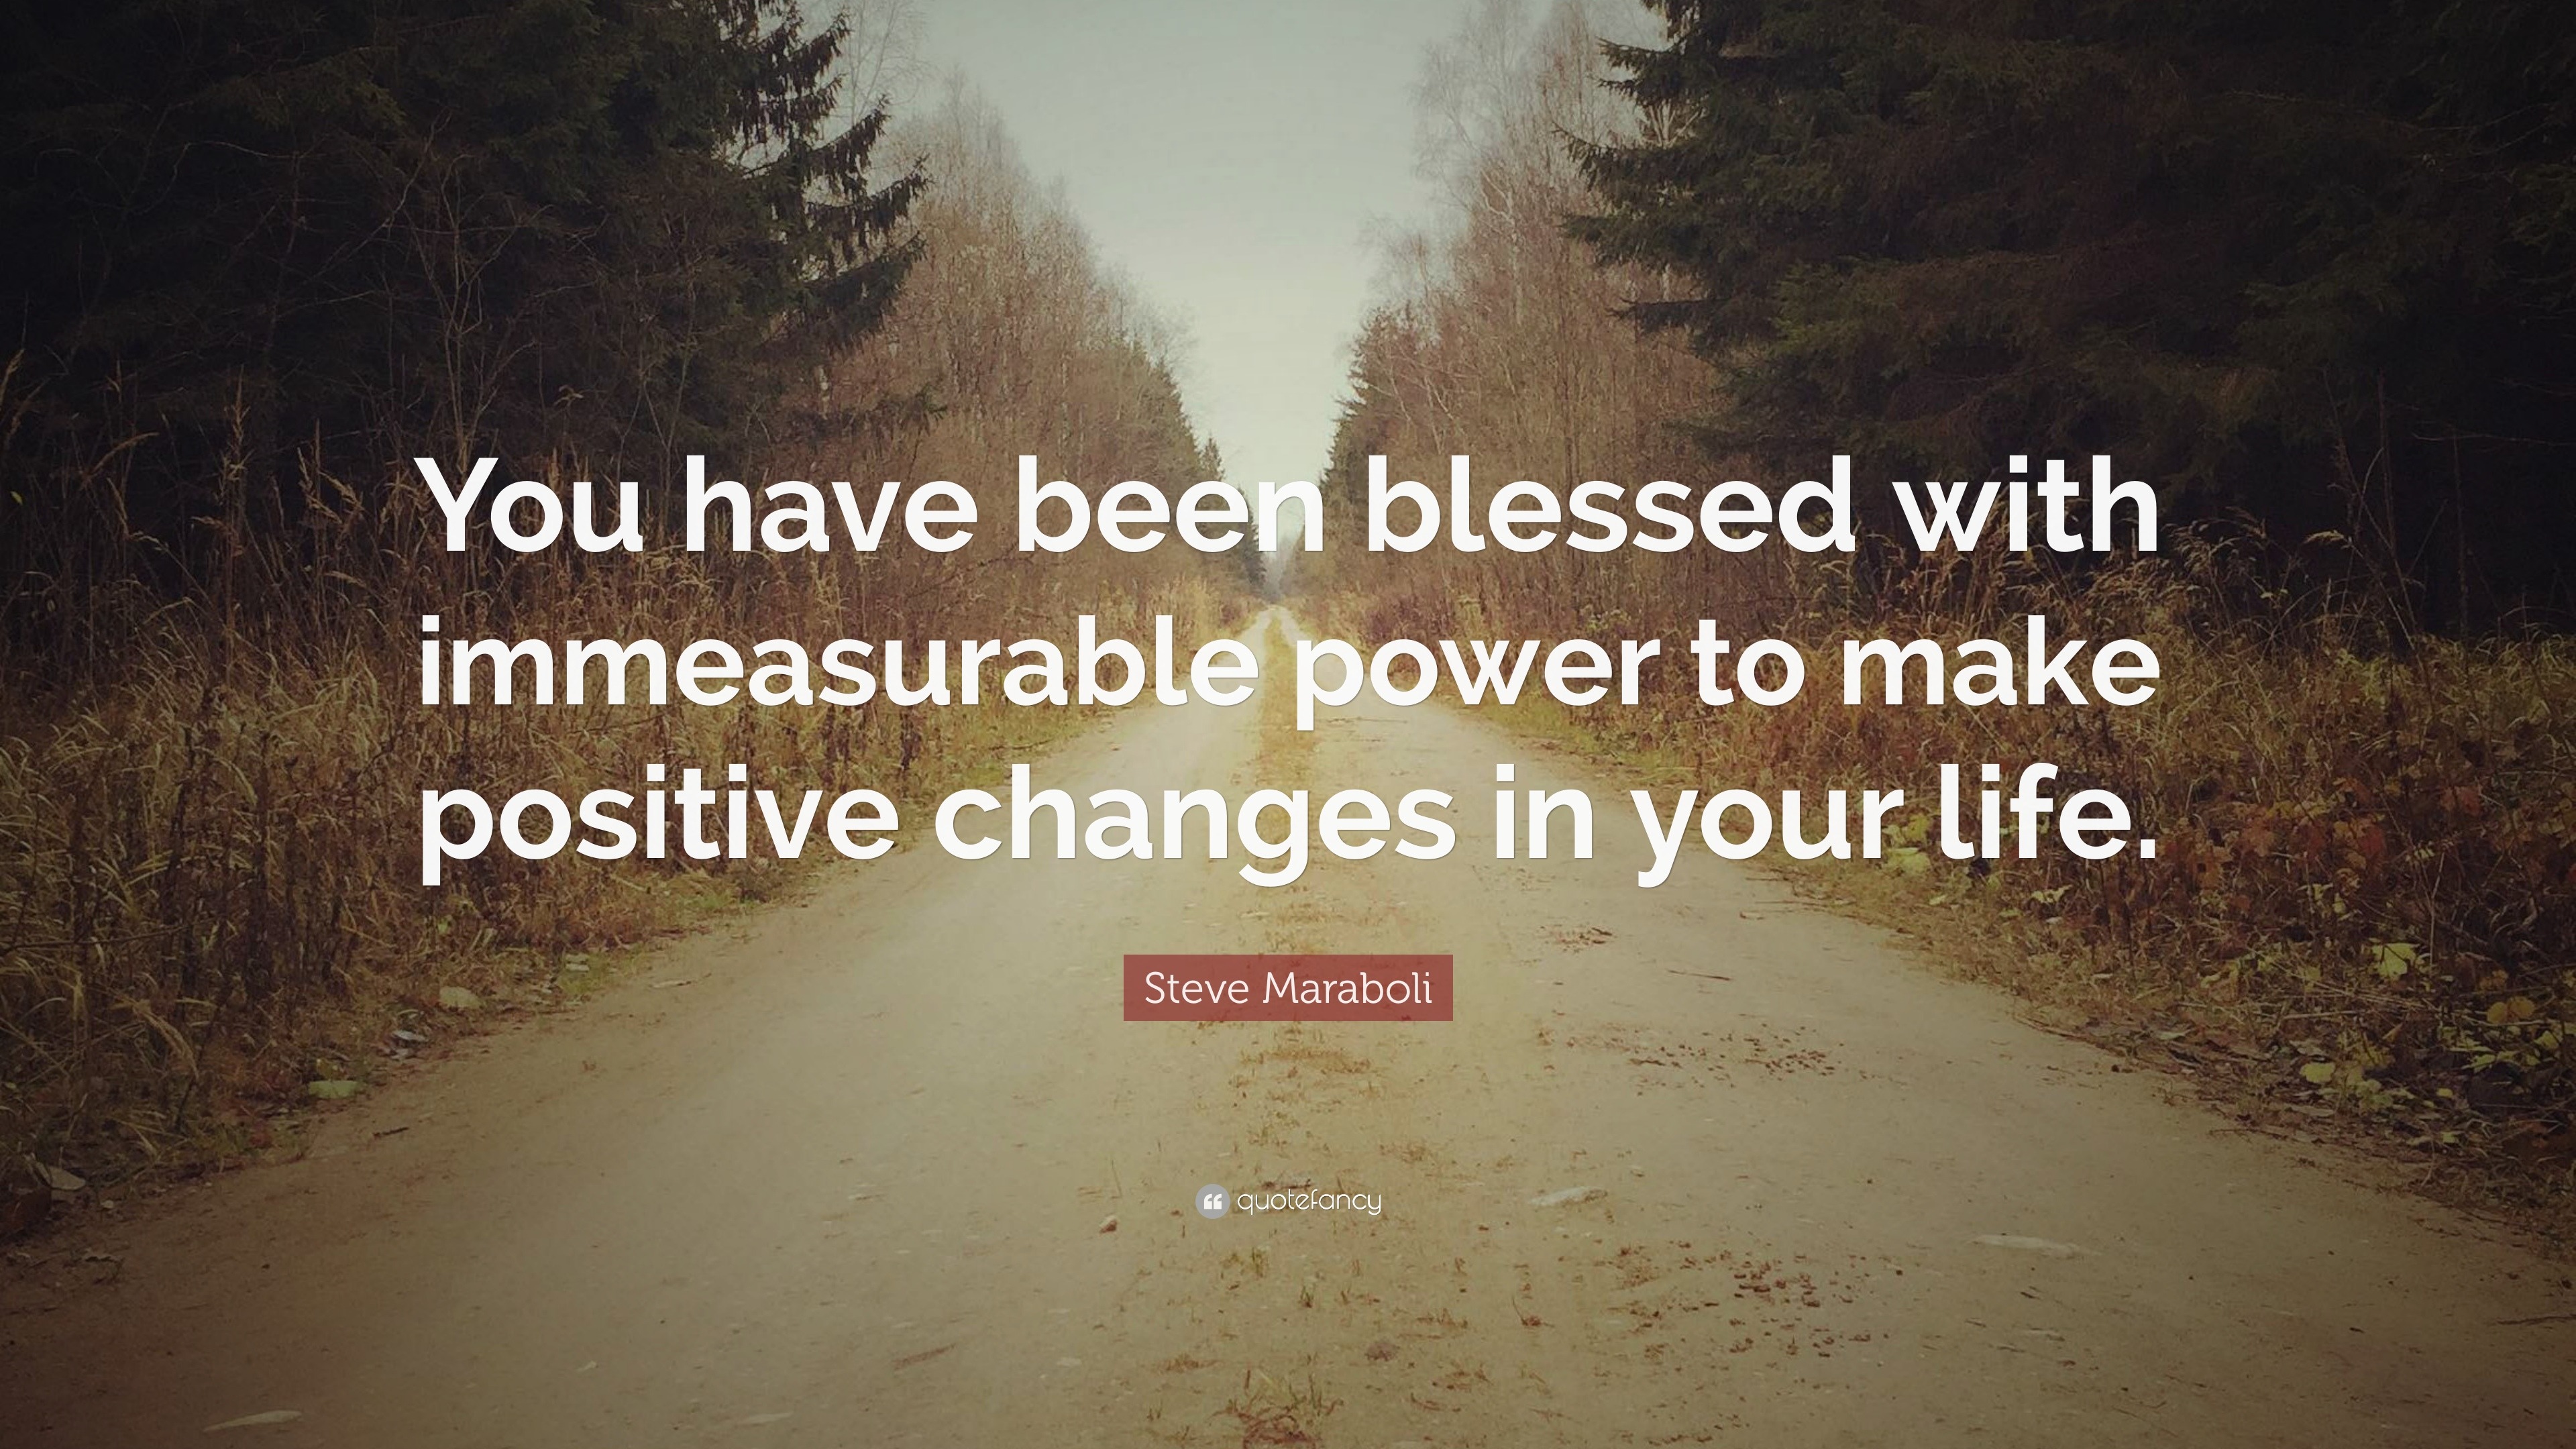 Steve Maraboli Quote “You have been blessed with immeasurable power to make positive changes